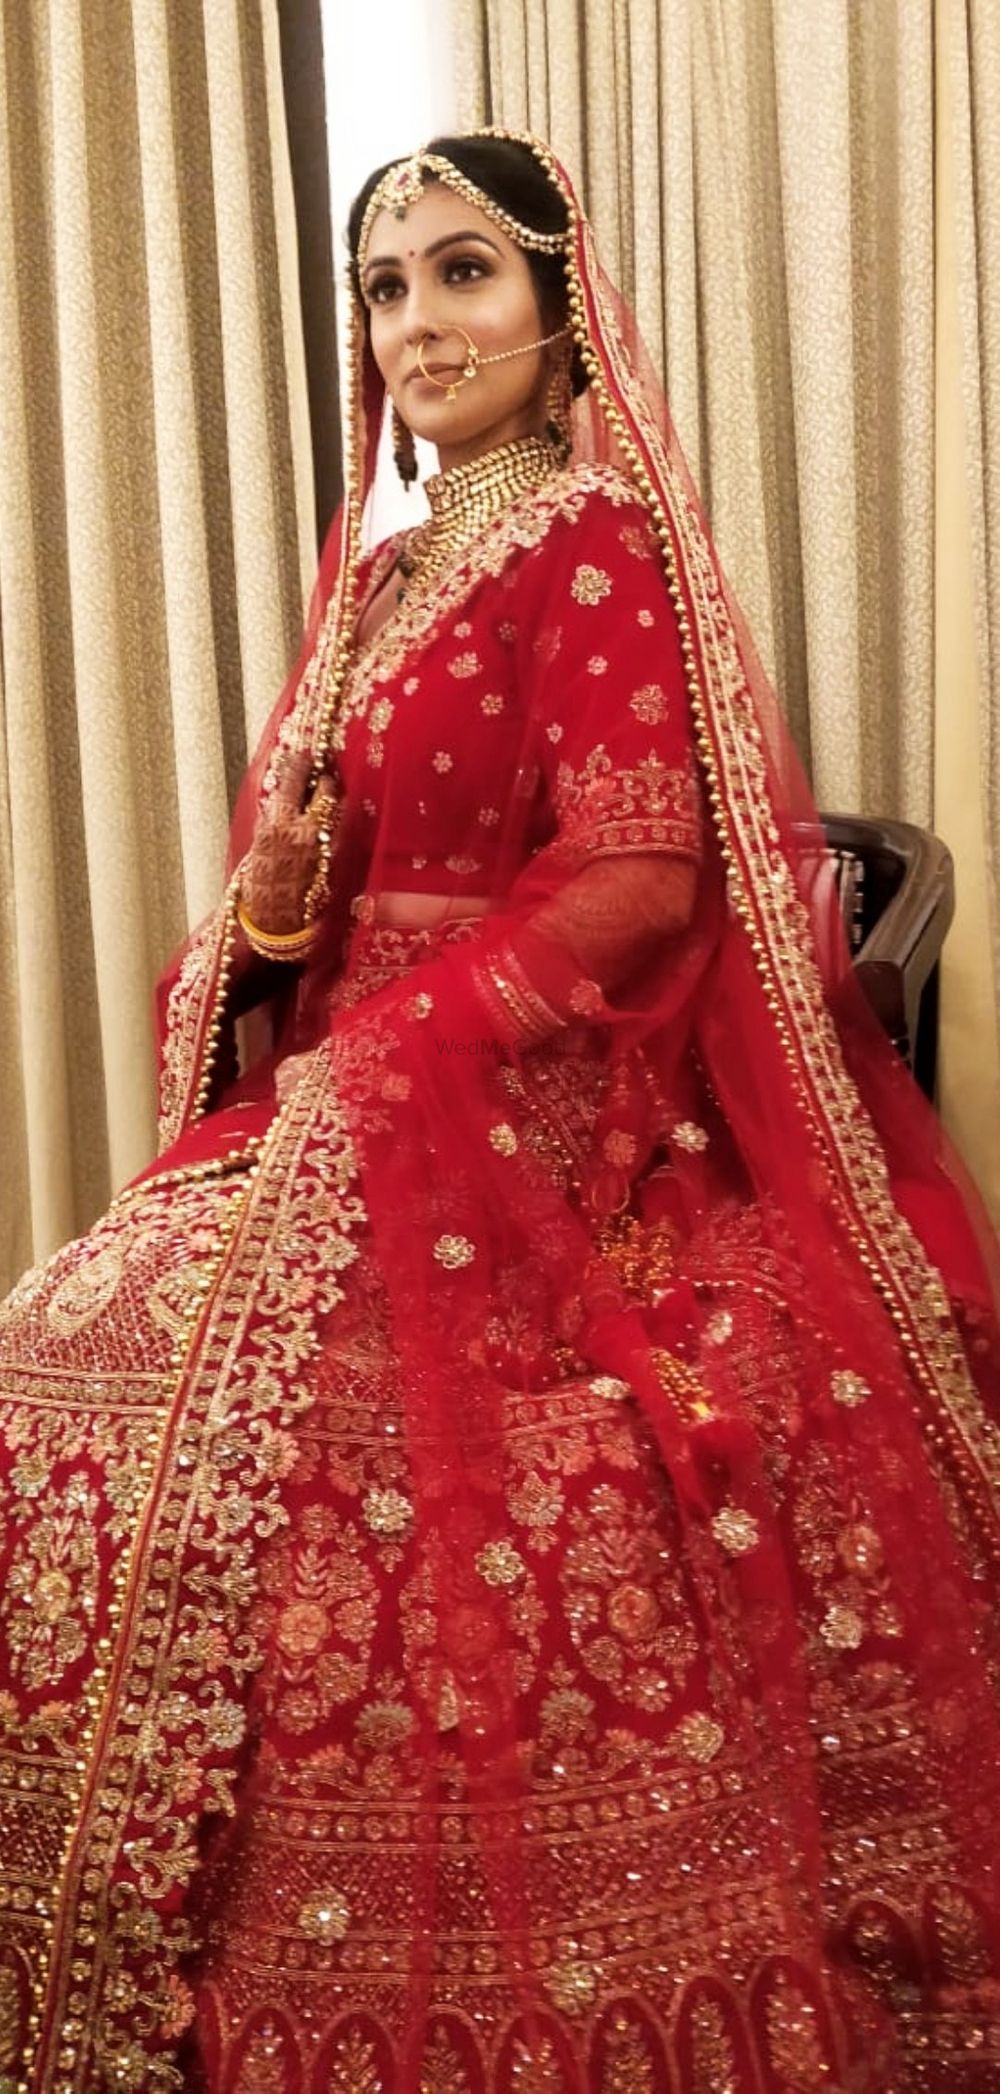 Photo From Neutral Tones on my bride Ishika Singh from Delhi - By Geetika Mudgal